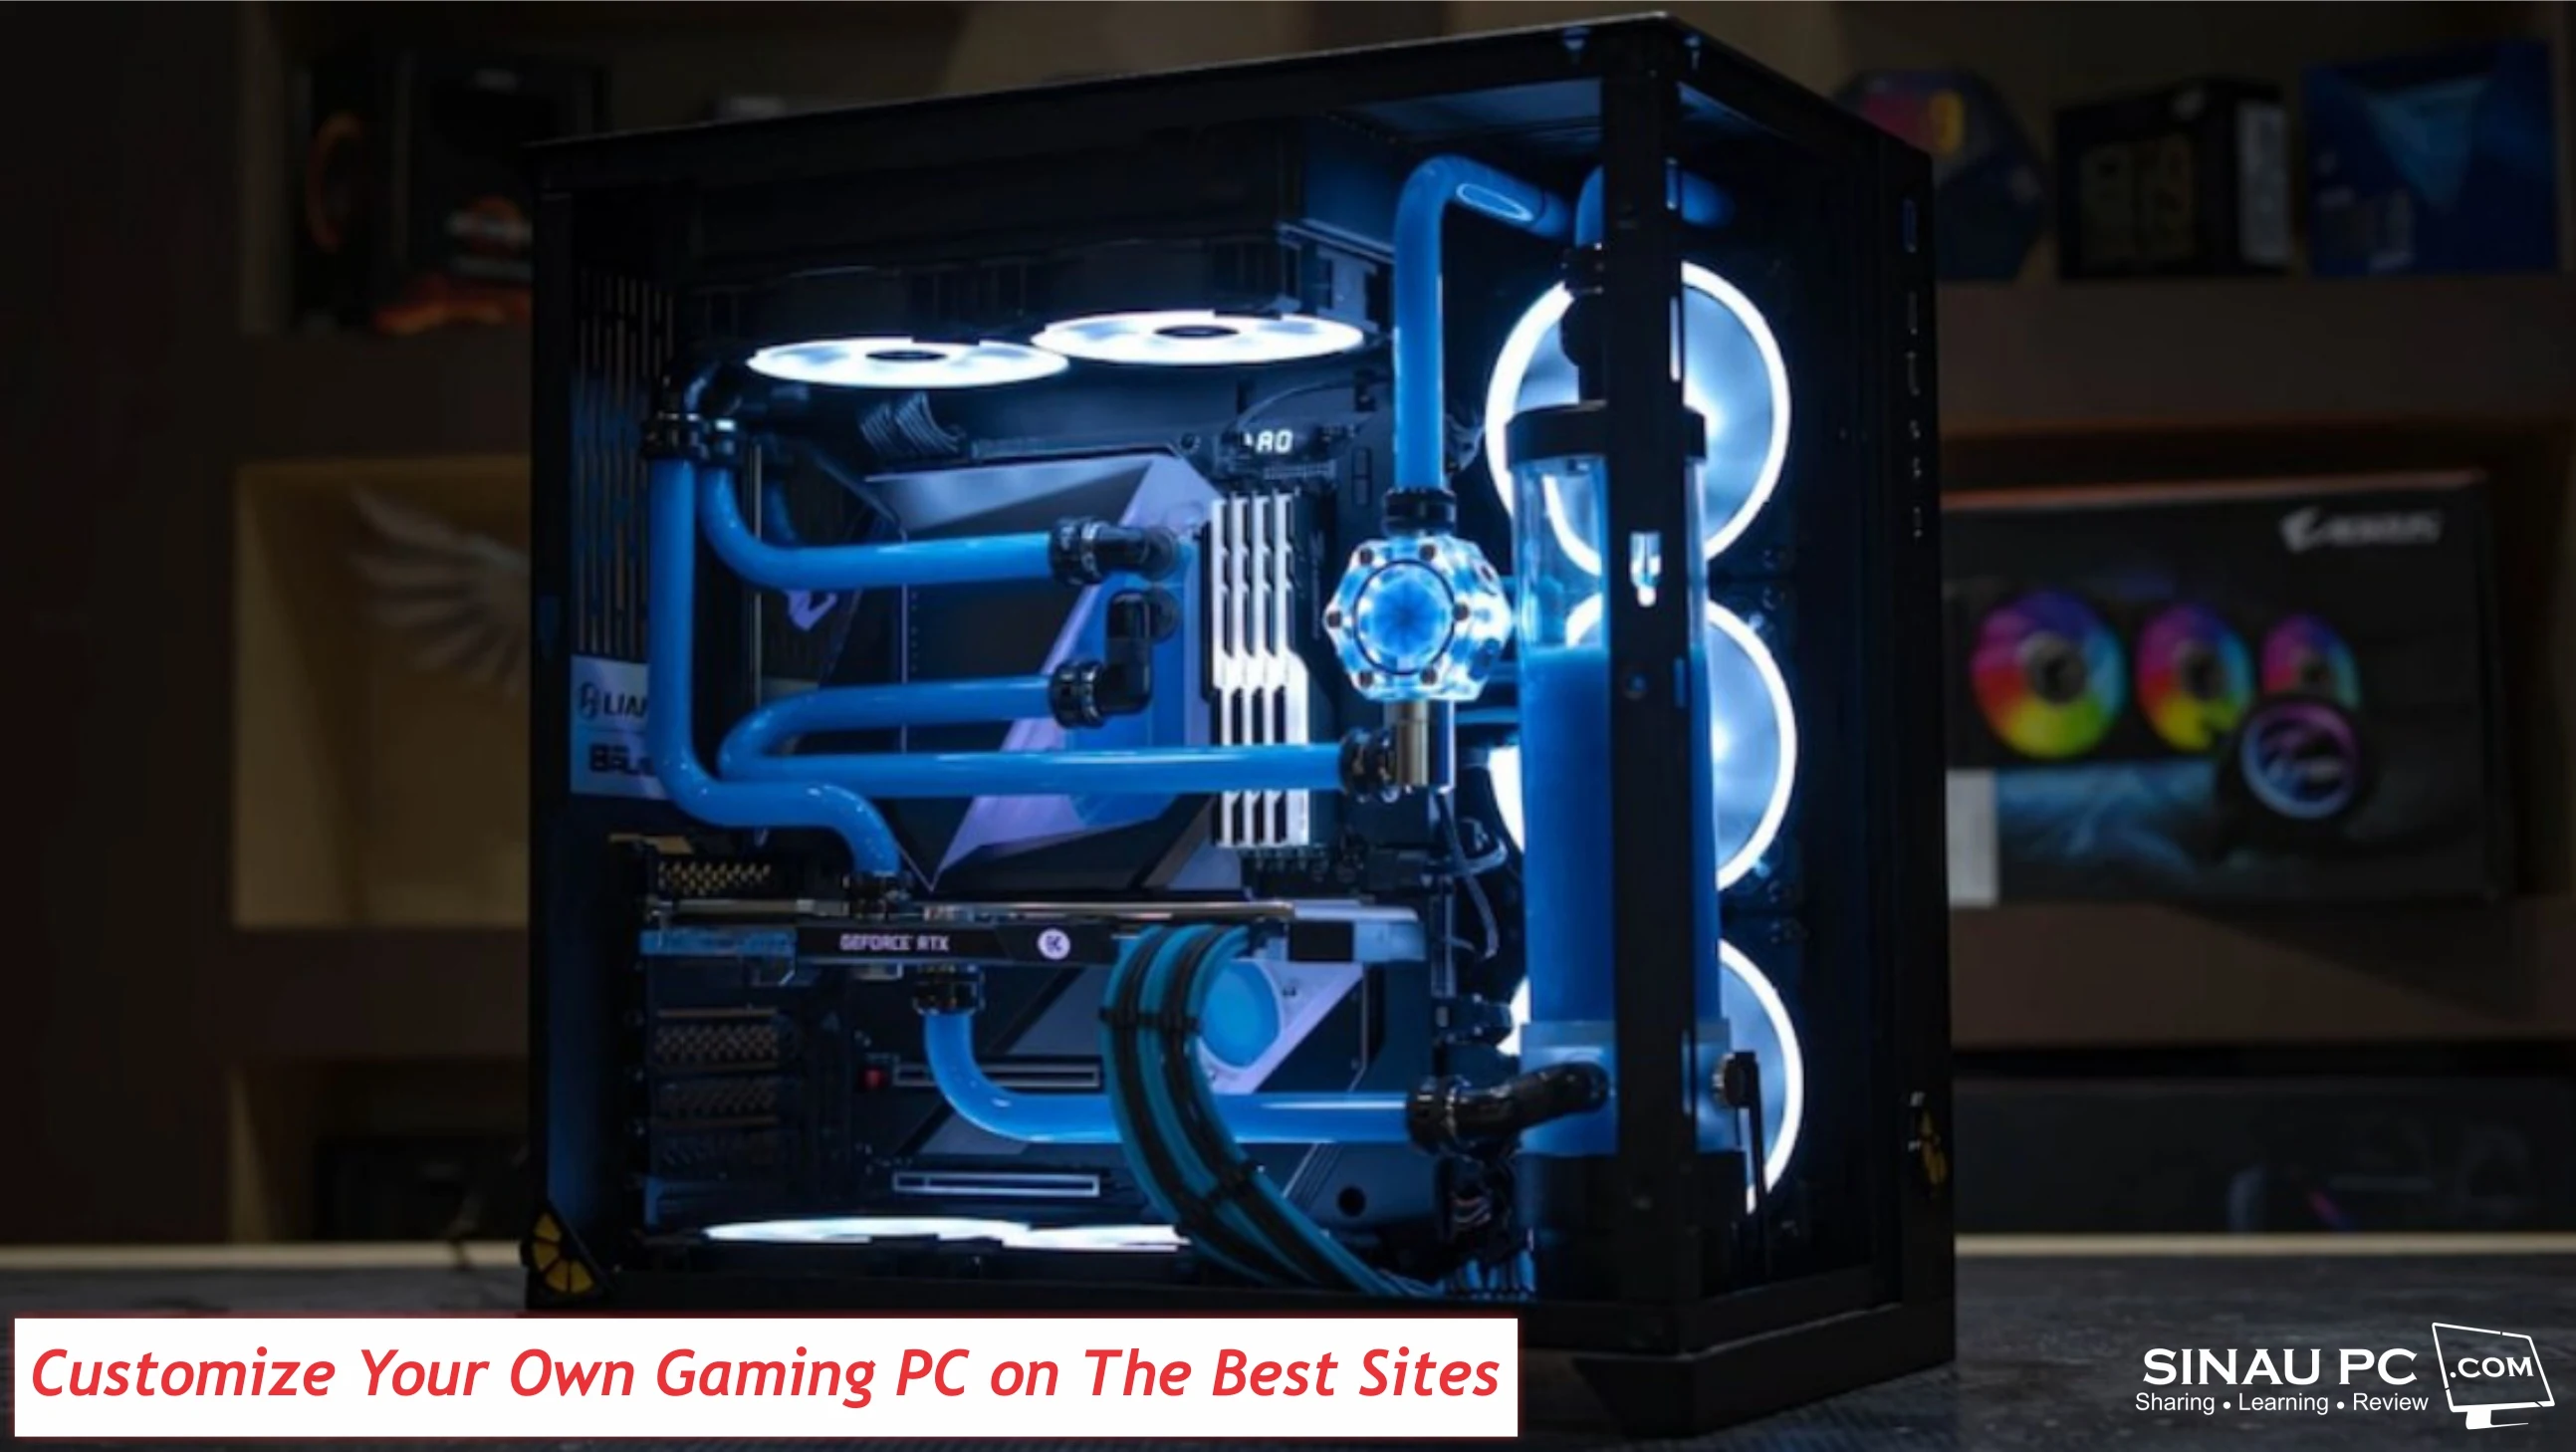 Customize Your Own Gaming PC on The Best Sites